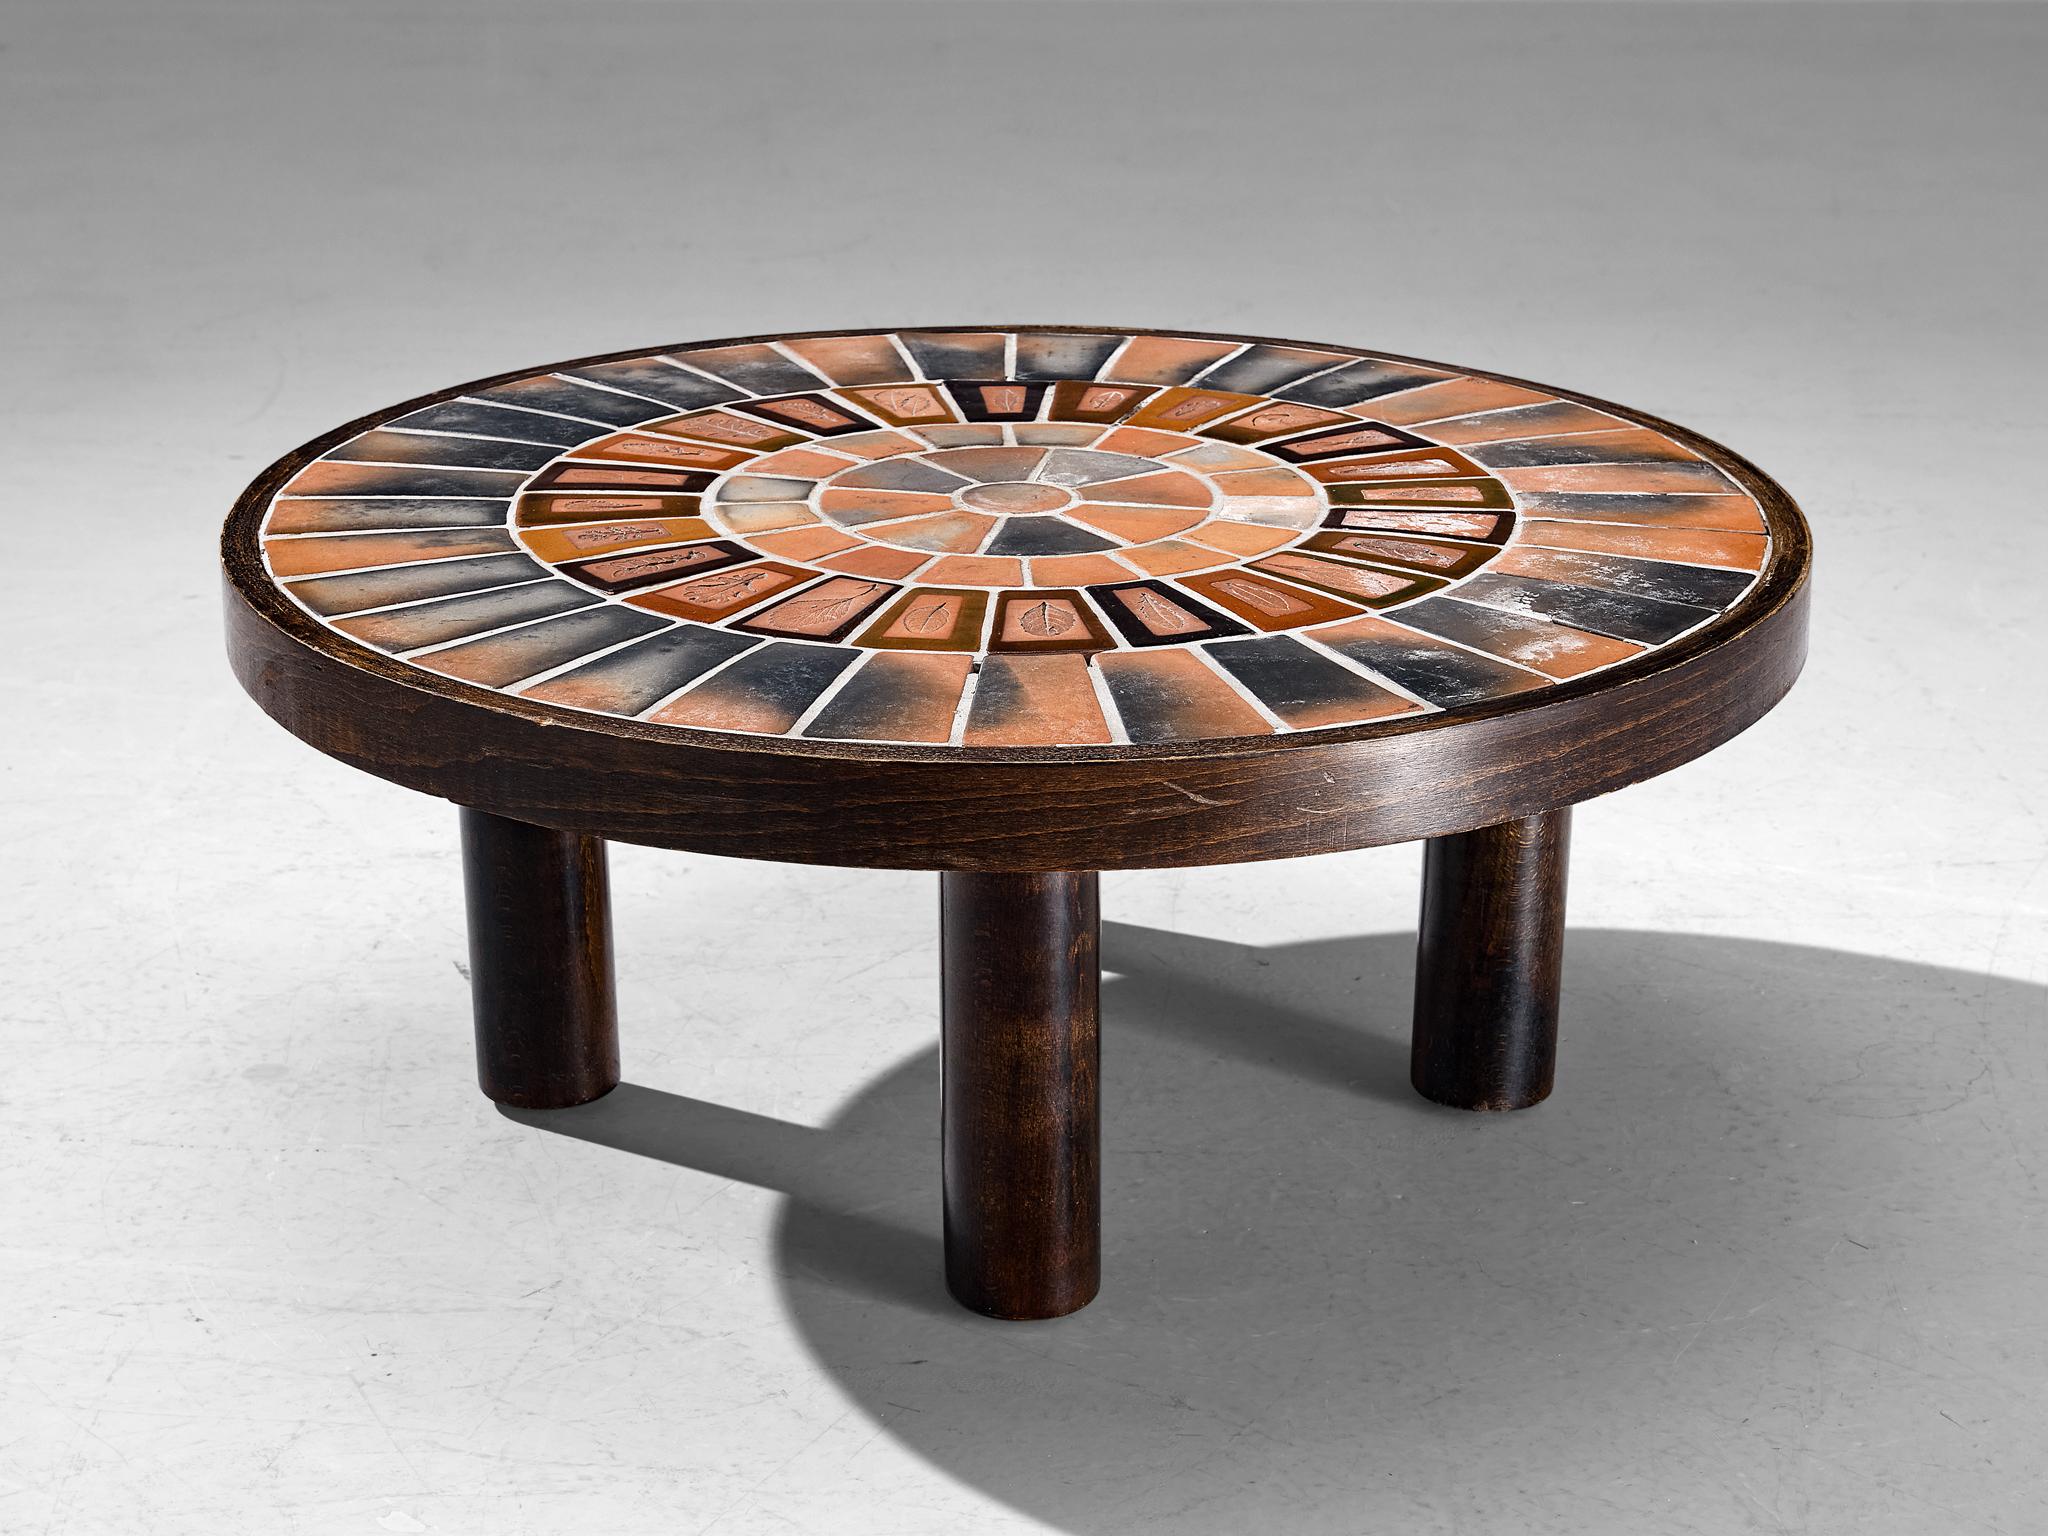 Late 20th Century Roger Capron Coffee Table in Ceramic with Terracotta Colored Ceramics